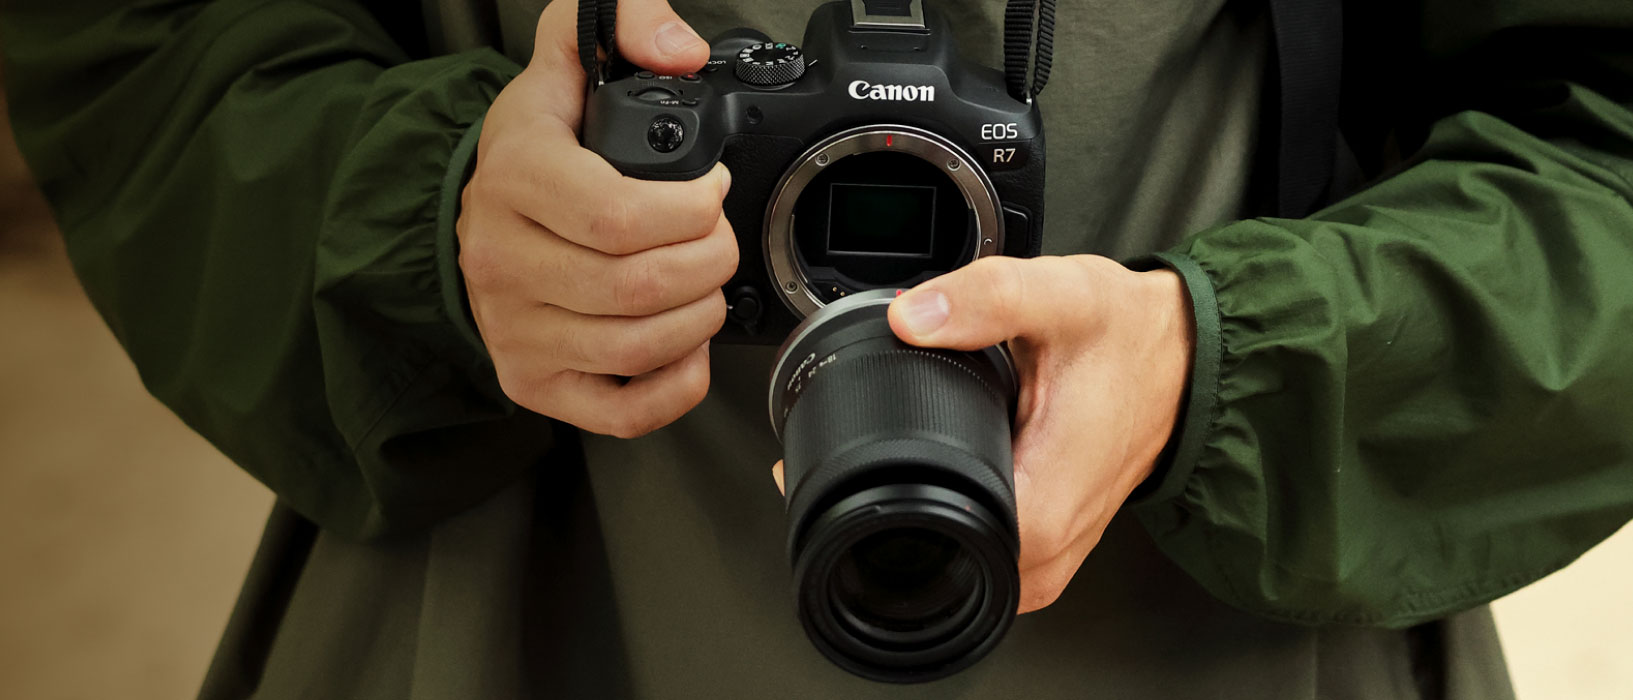 Hands-on with the EOS R7, Canon's new mid-range APS-C mirrorless camera 